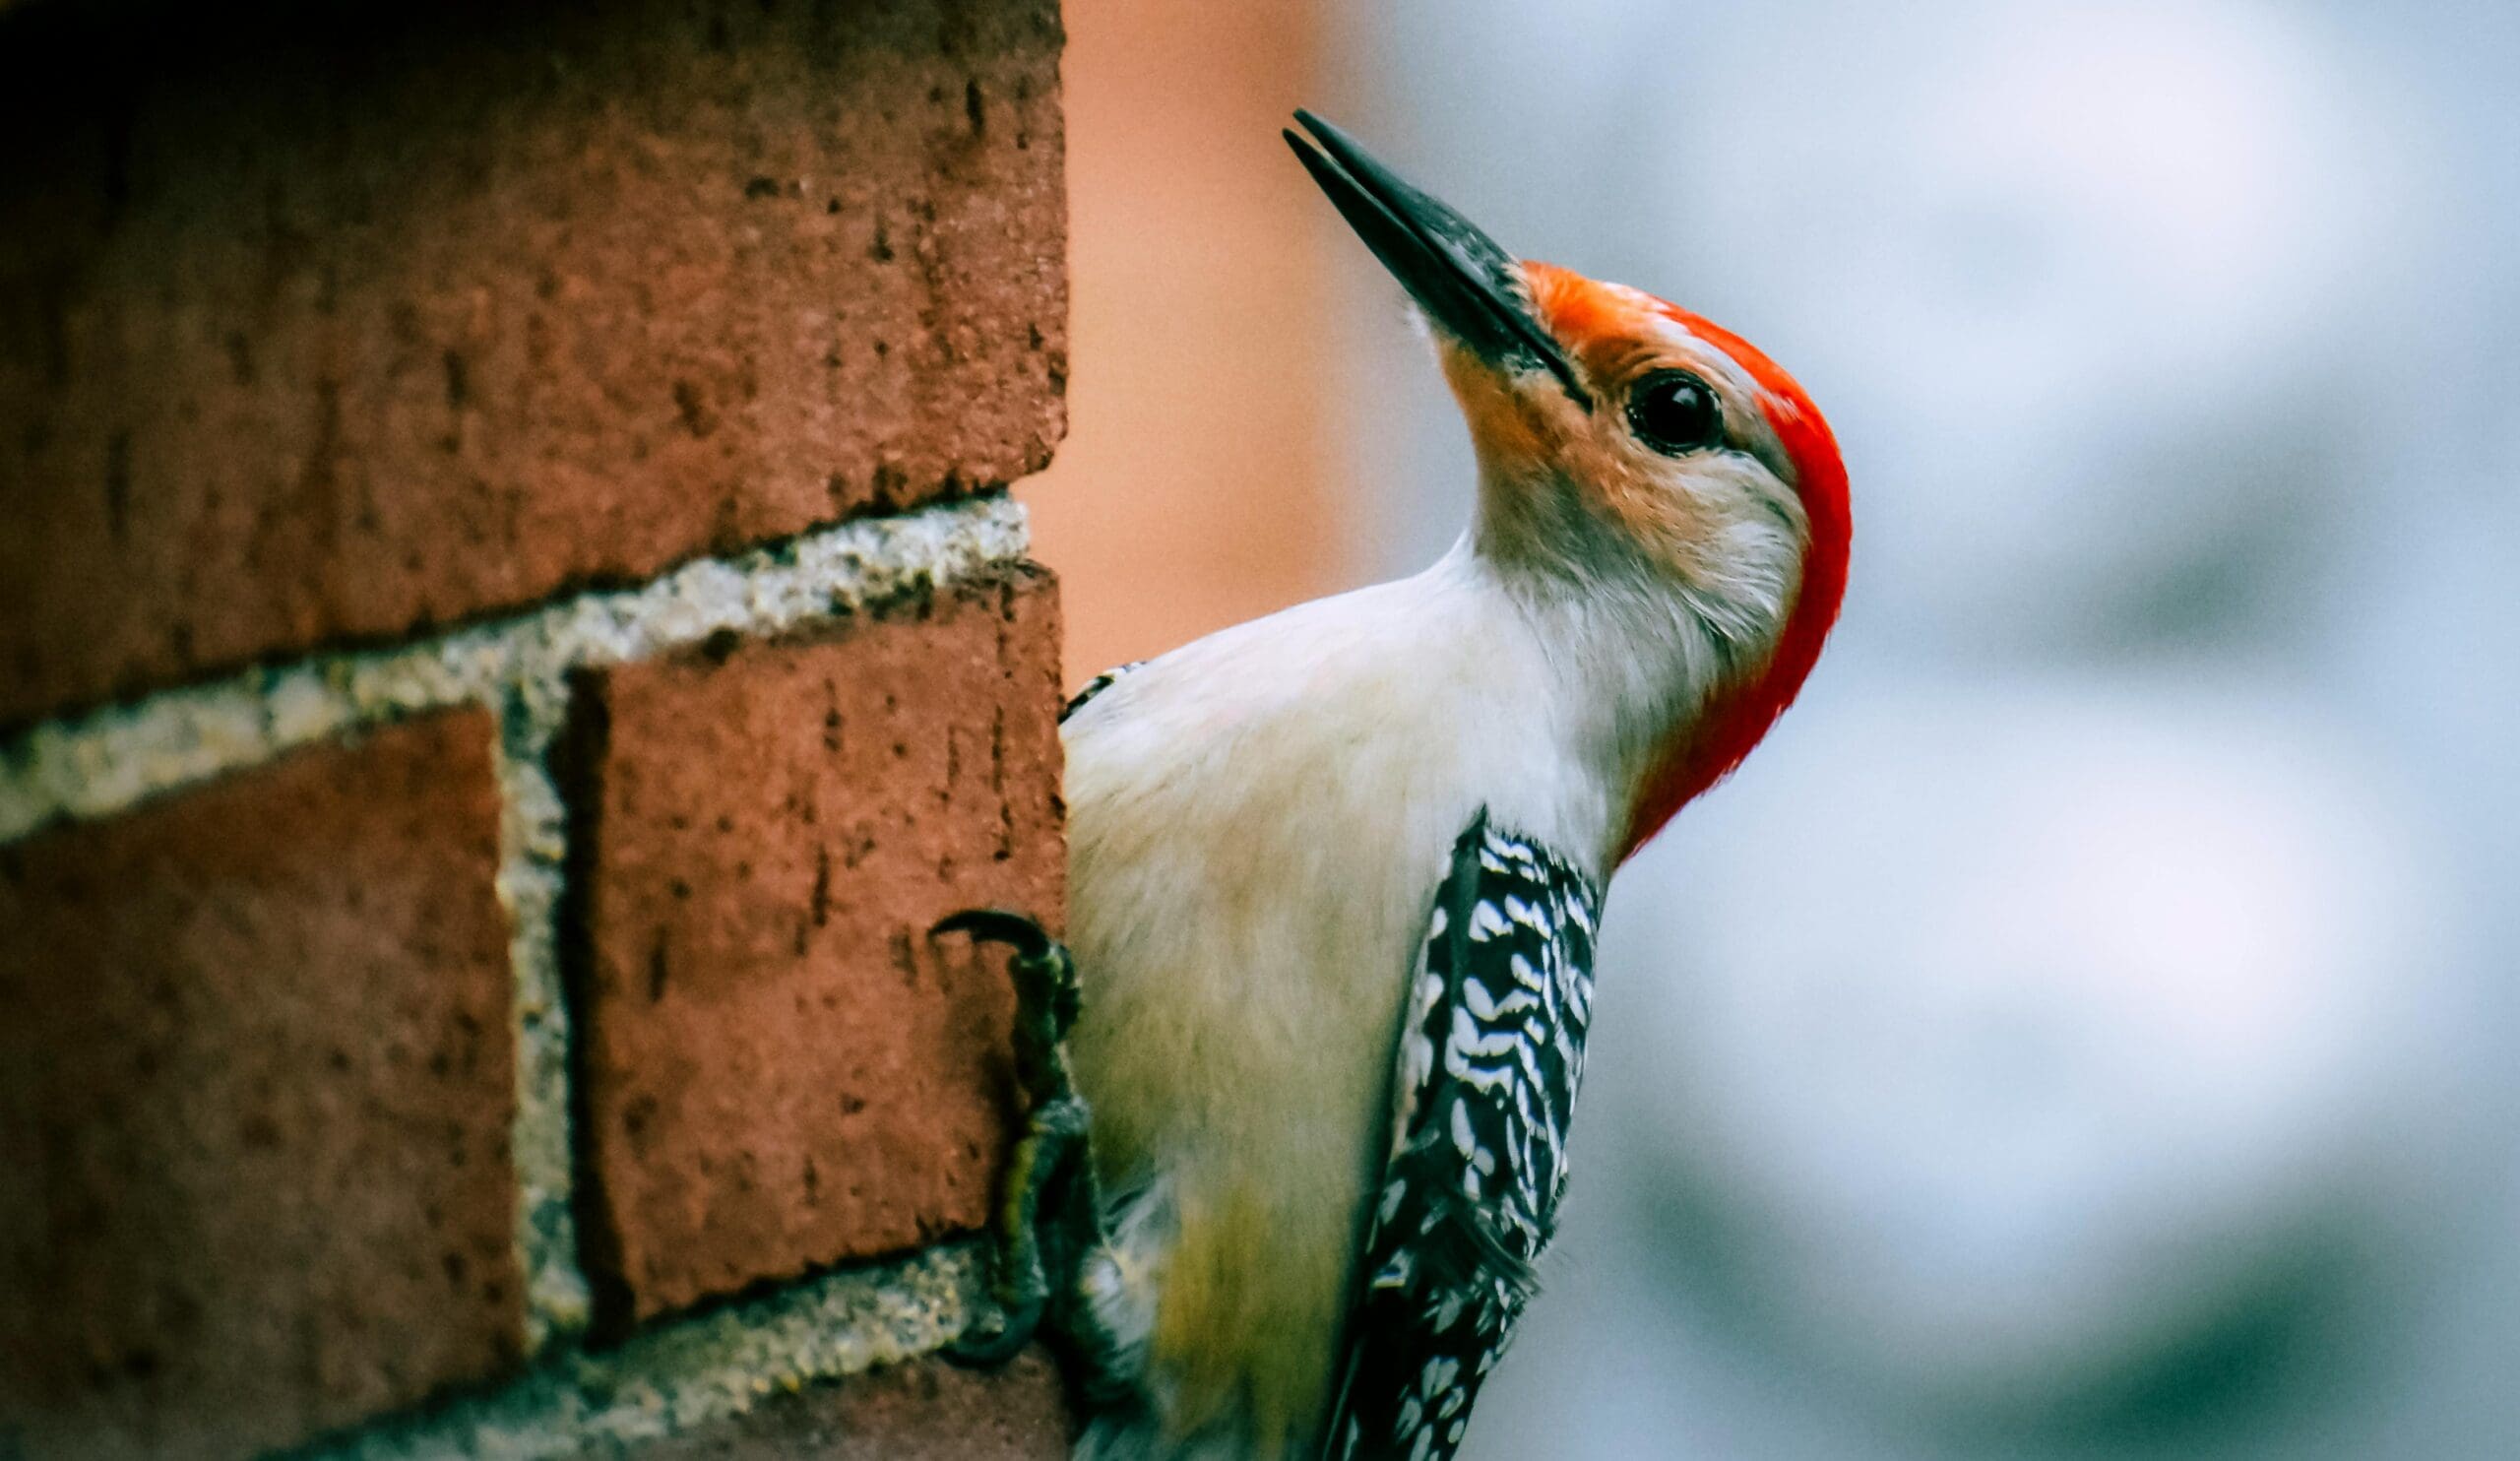 A close-up shot of a woodpecker with a red head, white front, and black and white patterned wings clinging to the side of a brick wall in Madison, WI. The background is blurred with a bokeh effect, highlighting the bird's detailed feathers amidst ongoing exterior renovations.